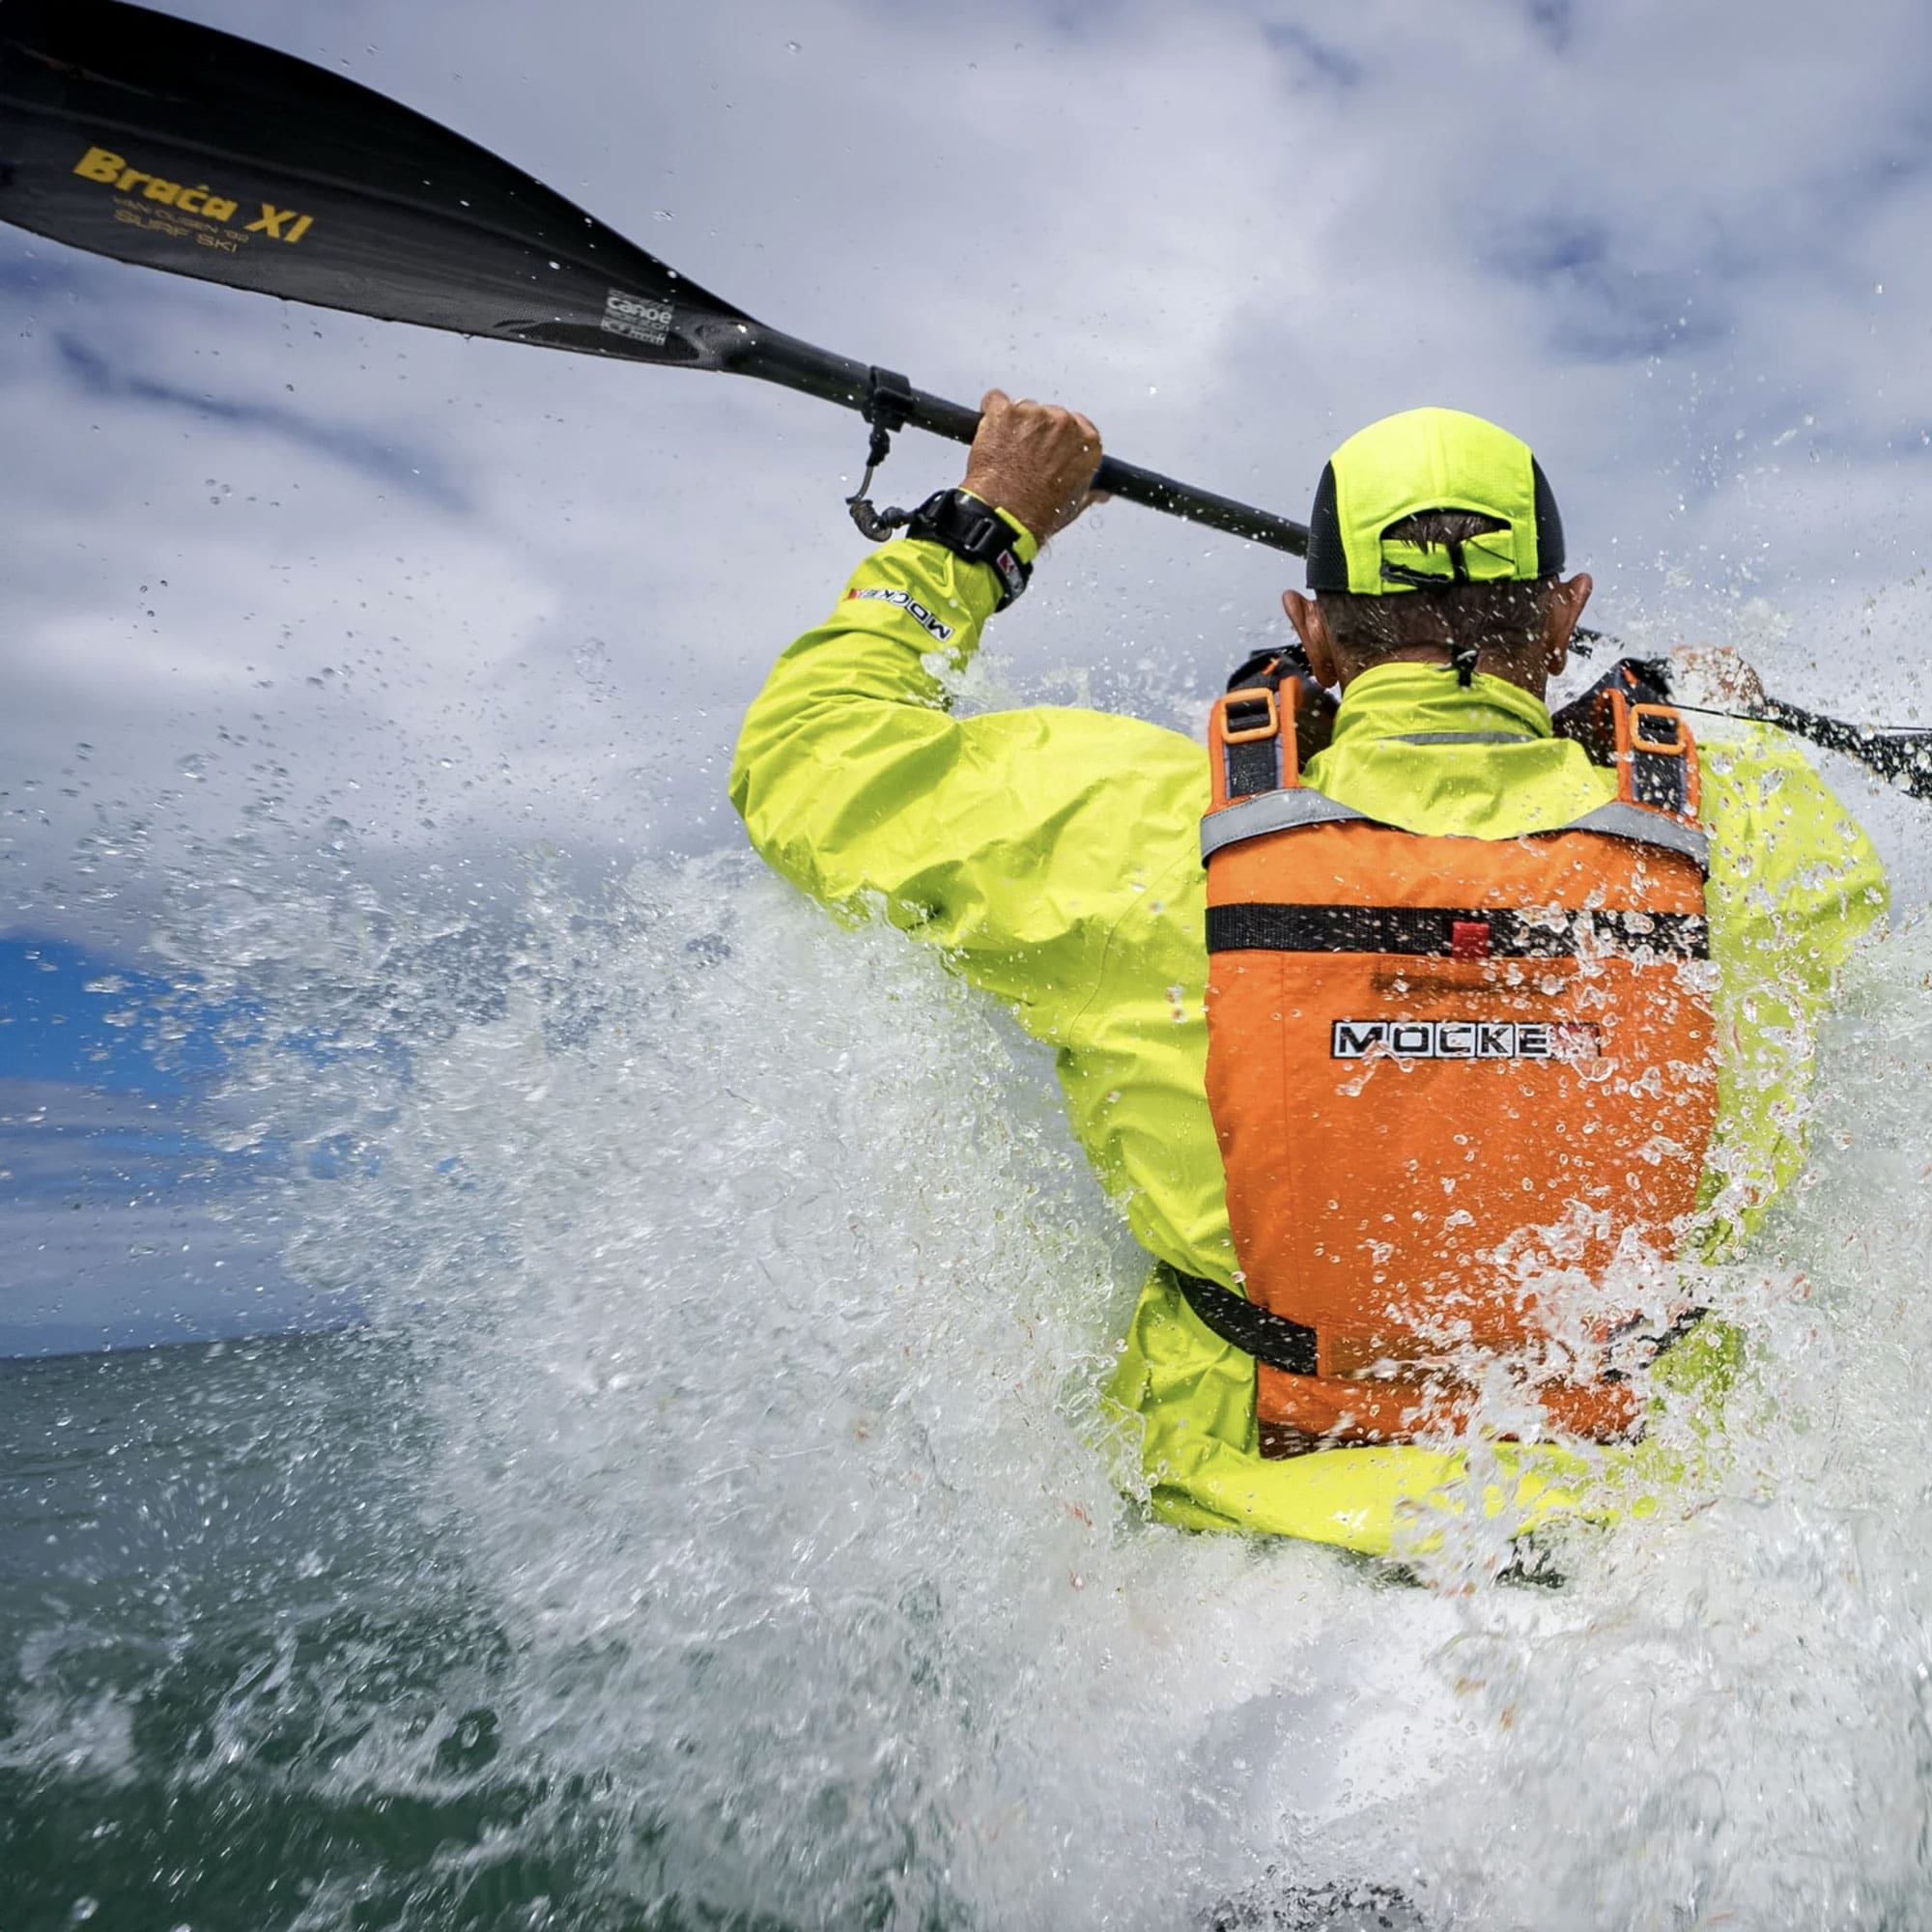 Oscar is using a Braca IV, one of the most popular and longest selling surfski wing paddles in the world.